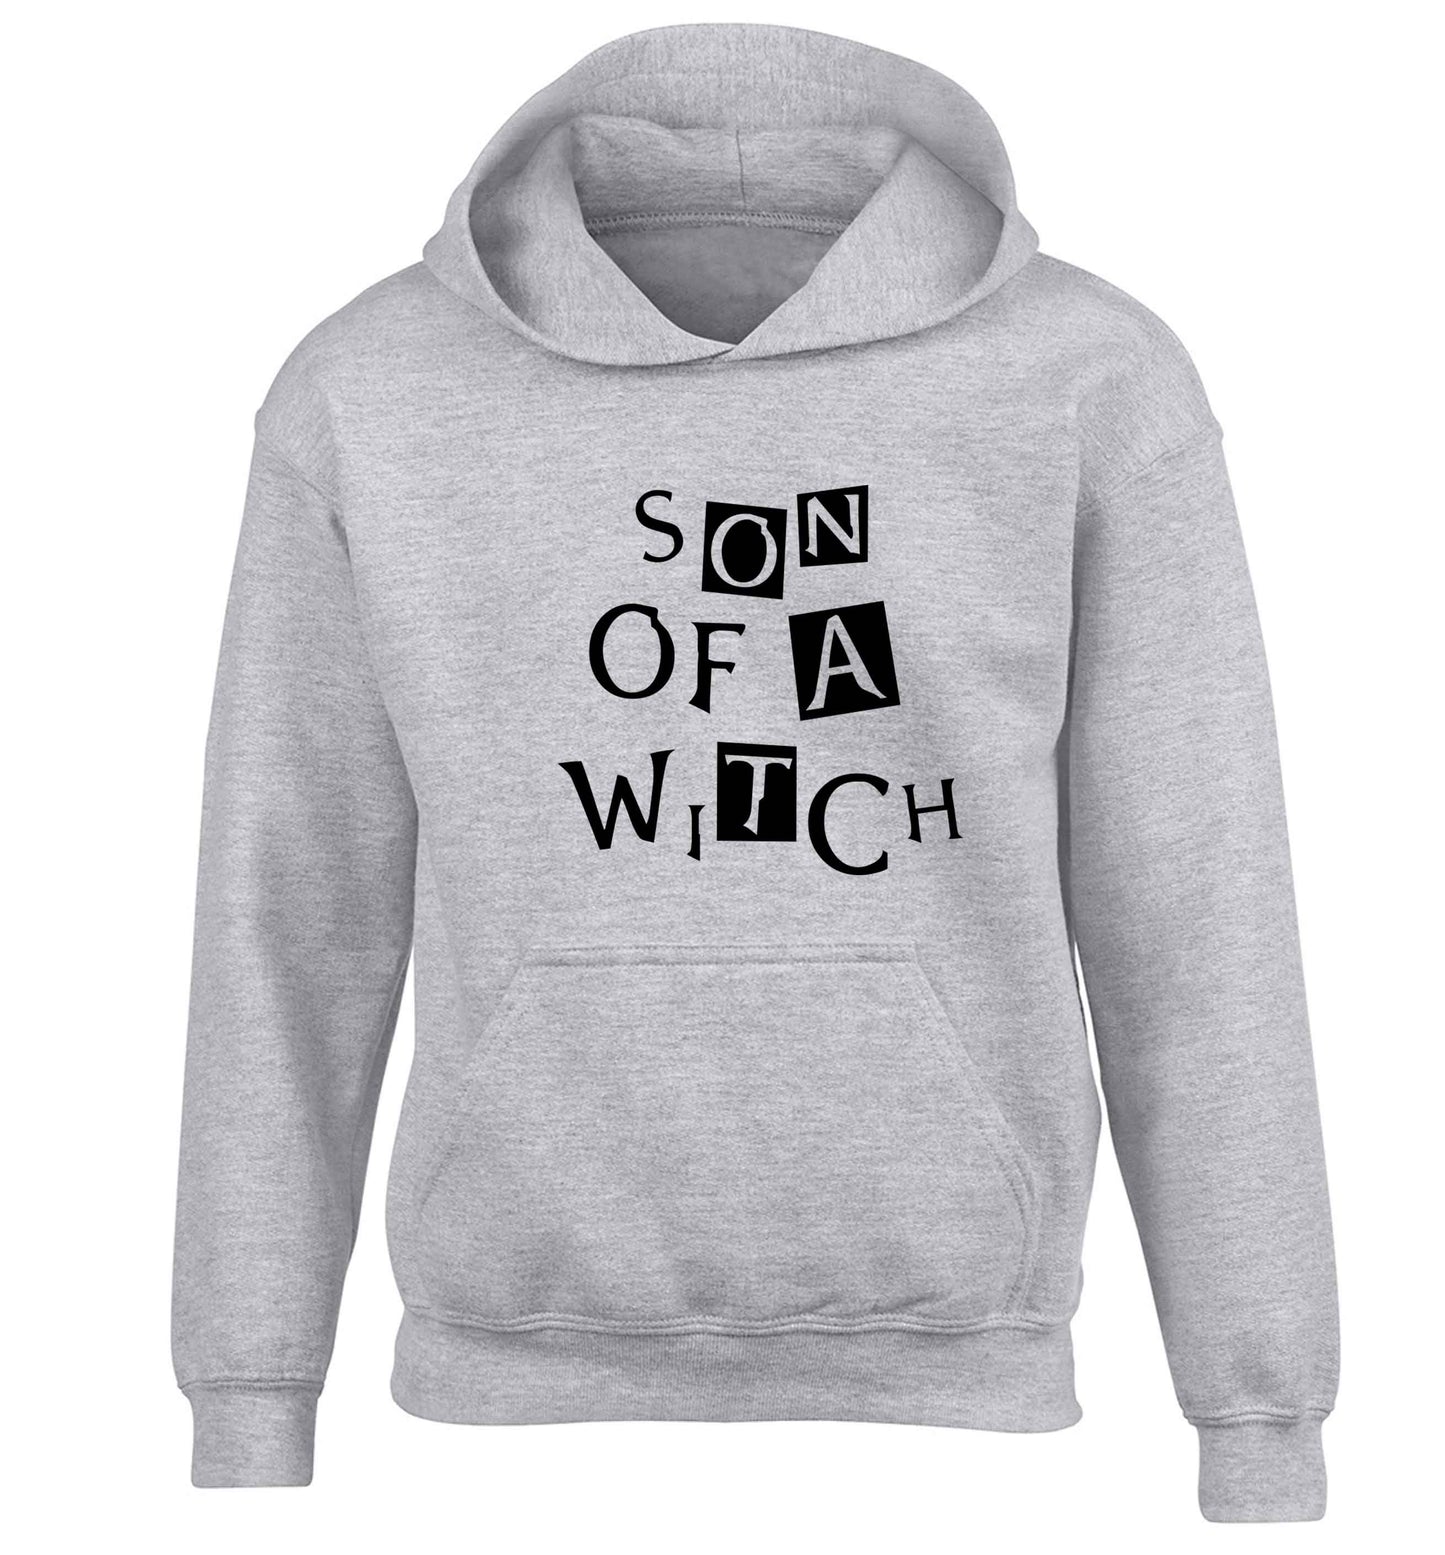 Son of a witch children's grey hoodie 12-13 Years